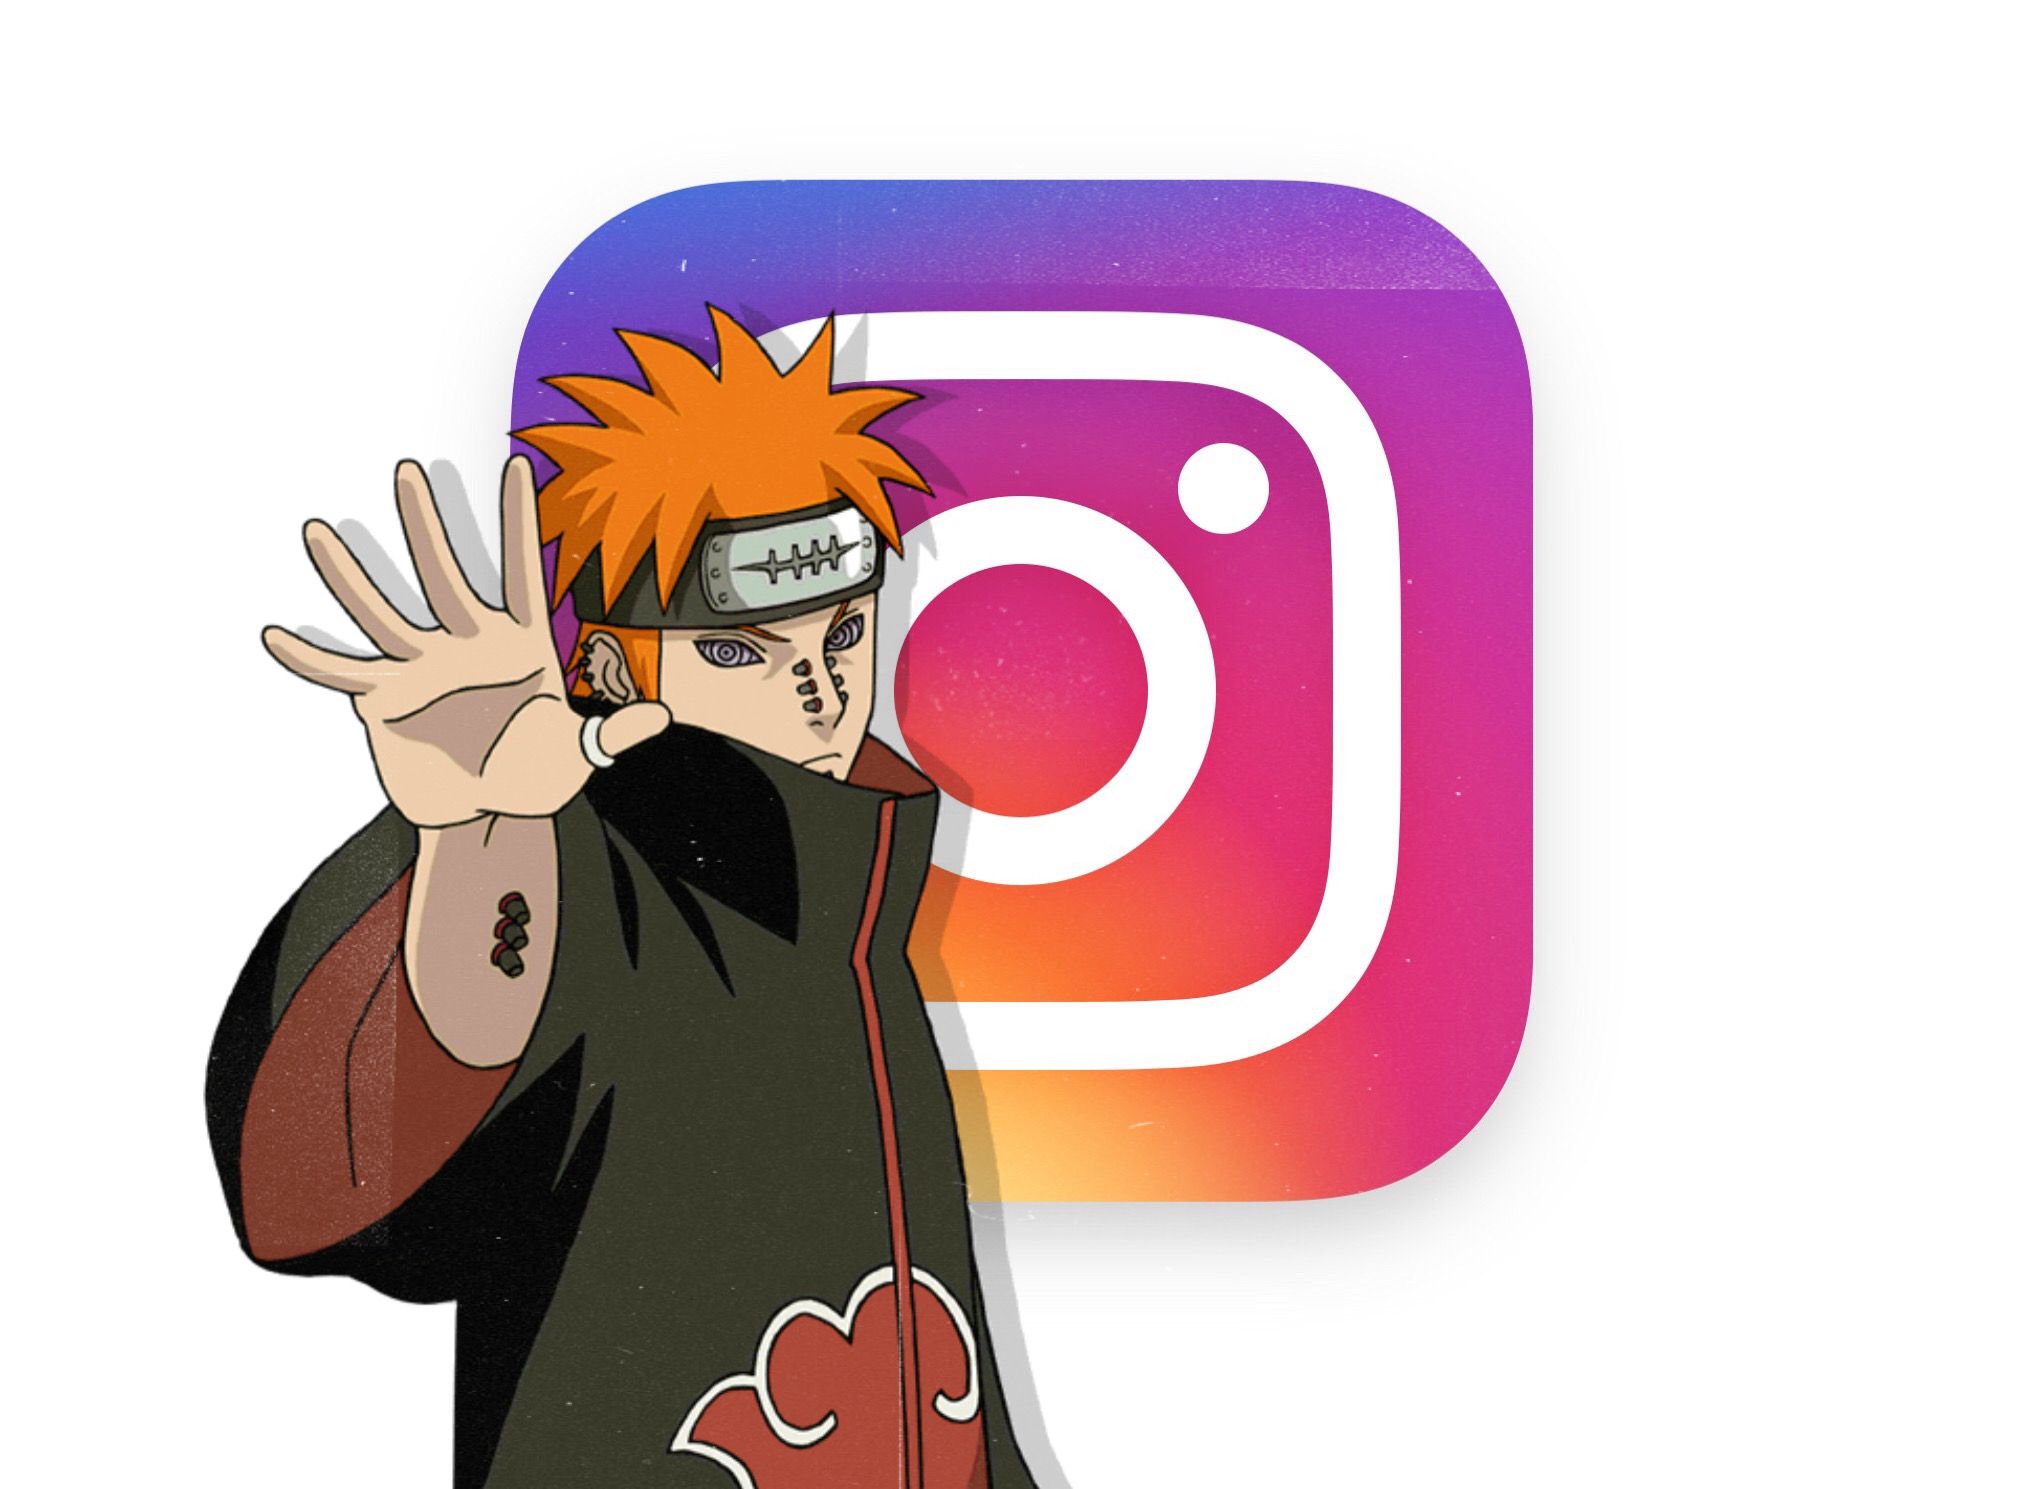 Anime App Icons Instagram  Anime App Icons for Android  iOS 14 Home  Screen  Anime App icon Animated icons